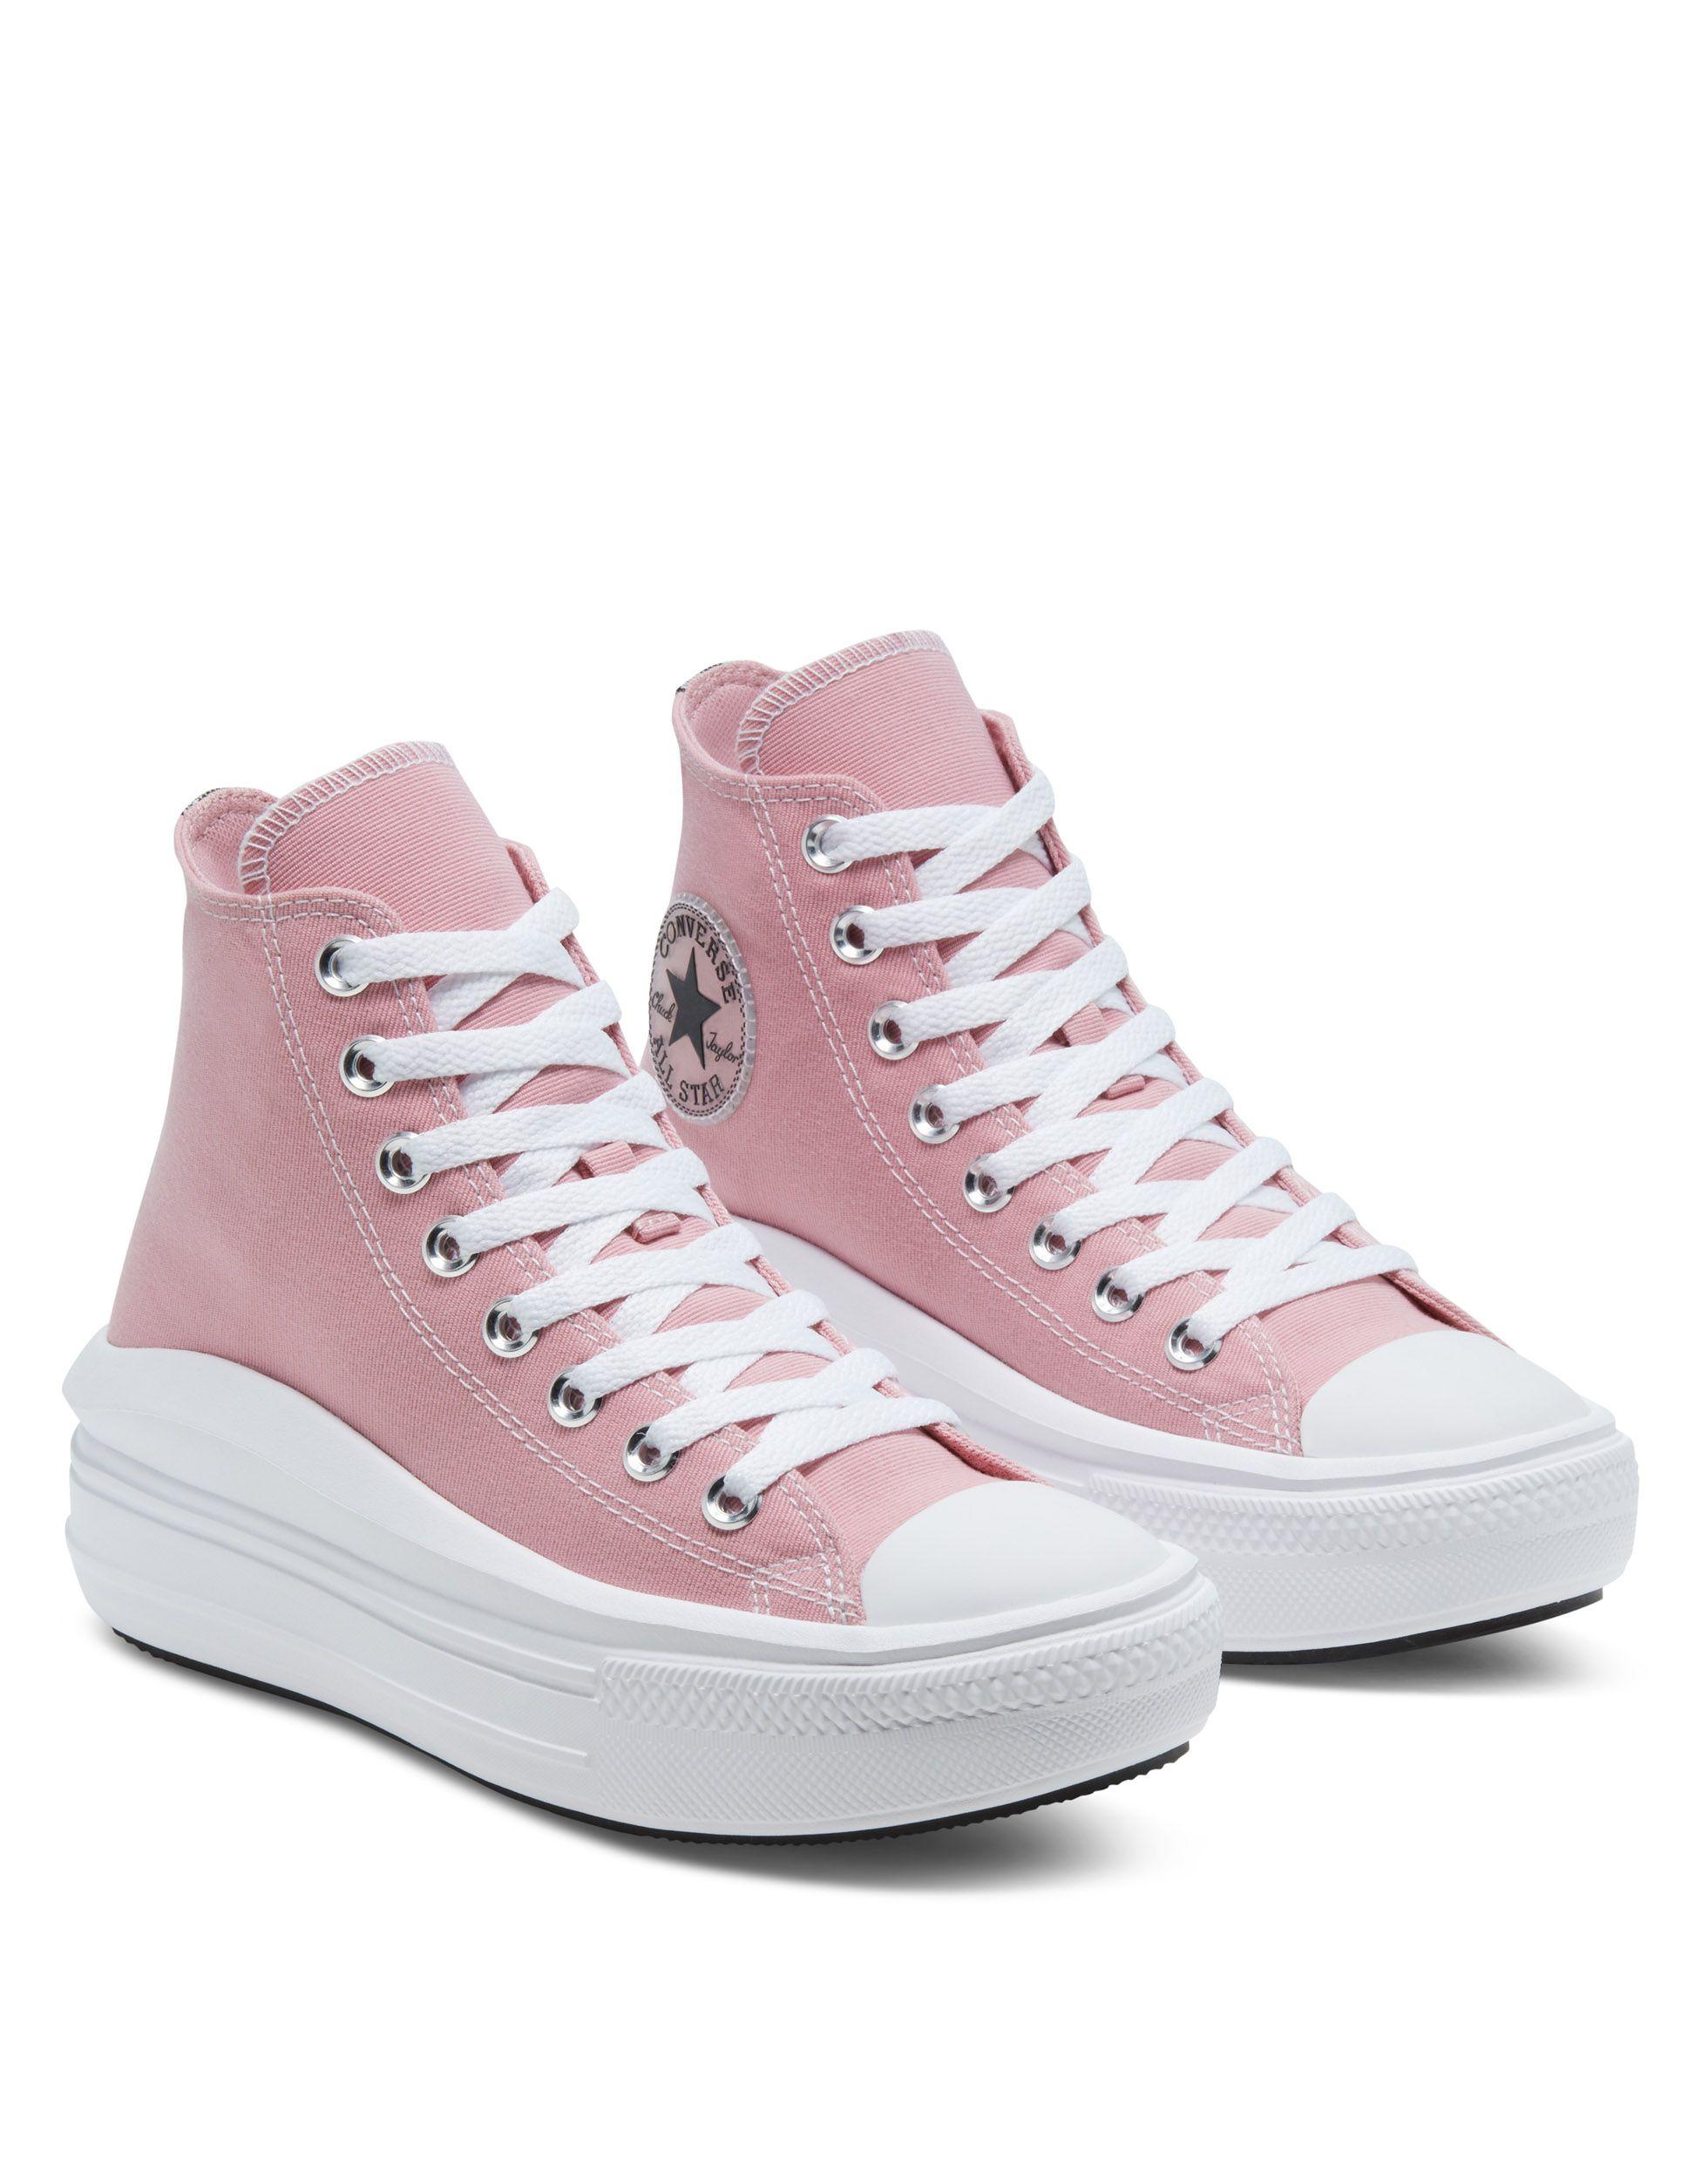 Converse Move Platform High-top Sneakers in Pink | Lyst